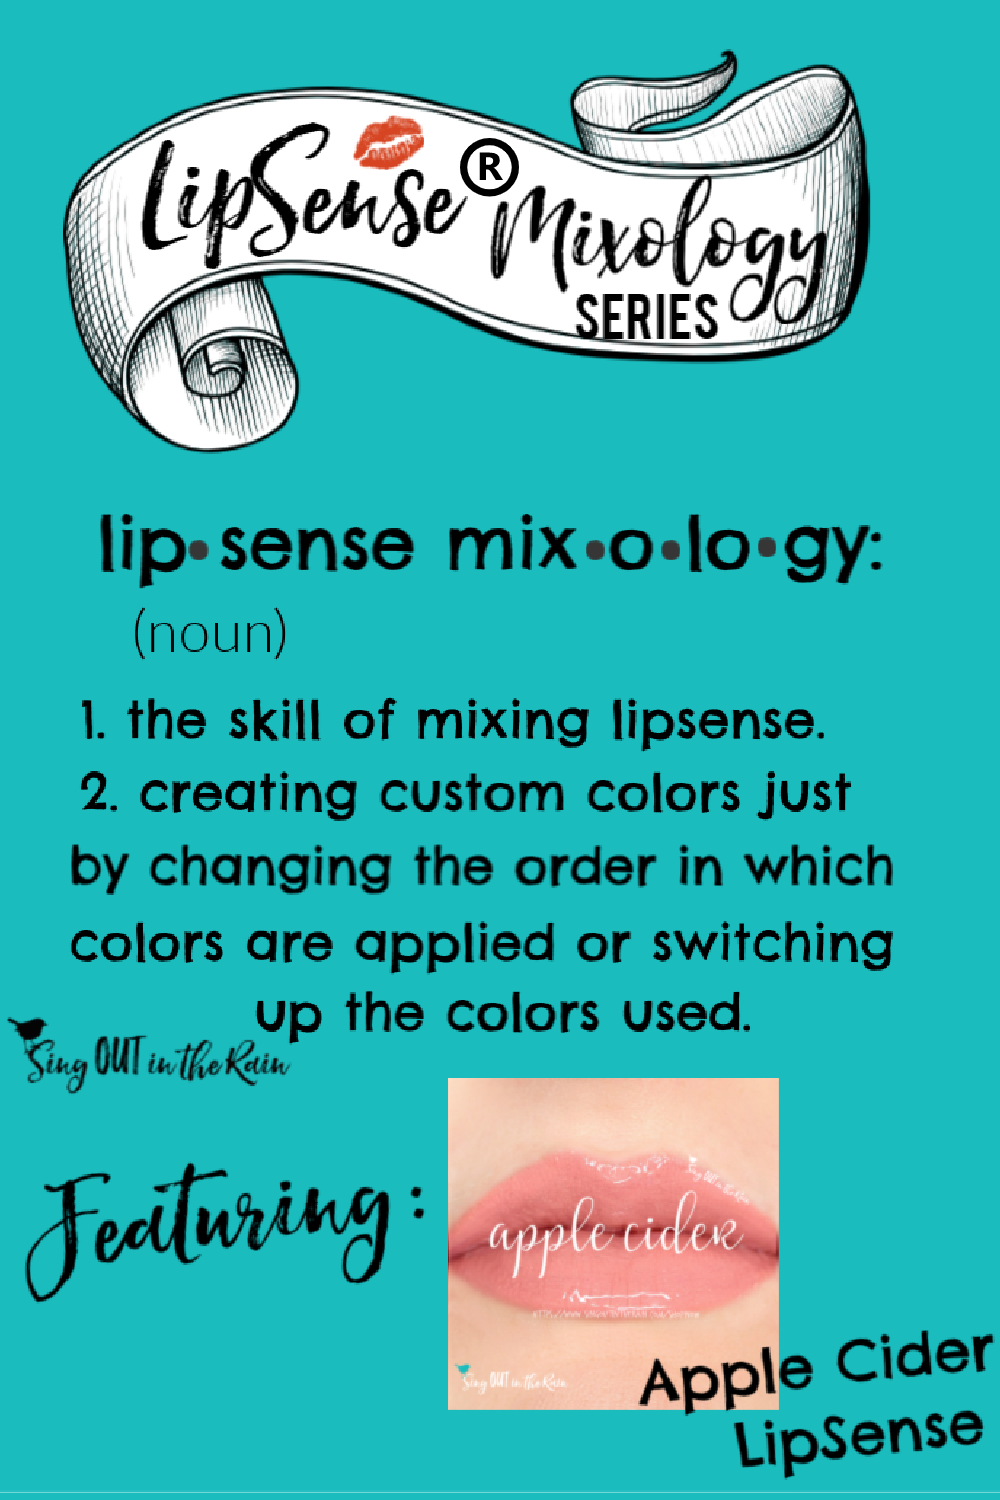 The Ultimate Guide to Apple Cider LipSense Mixology